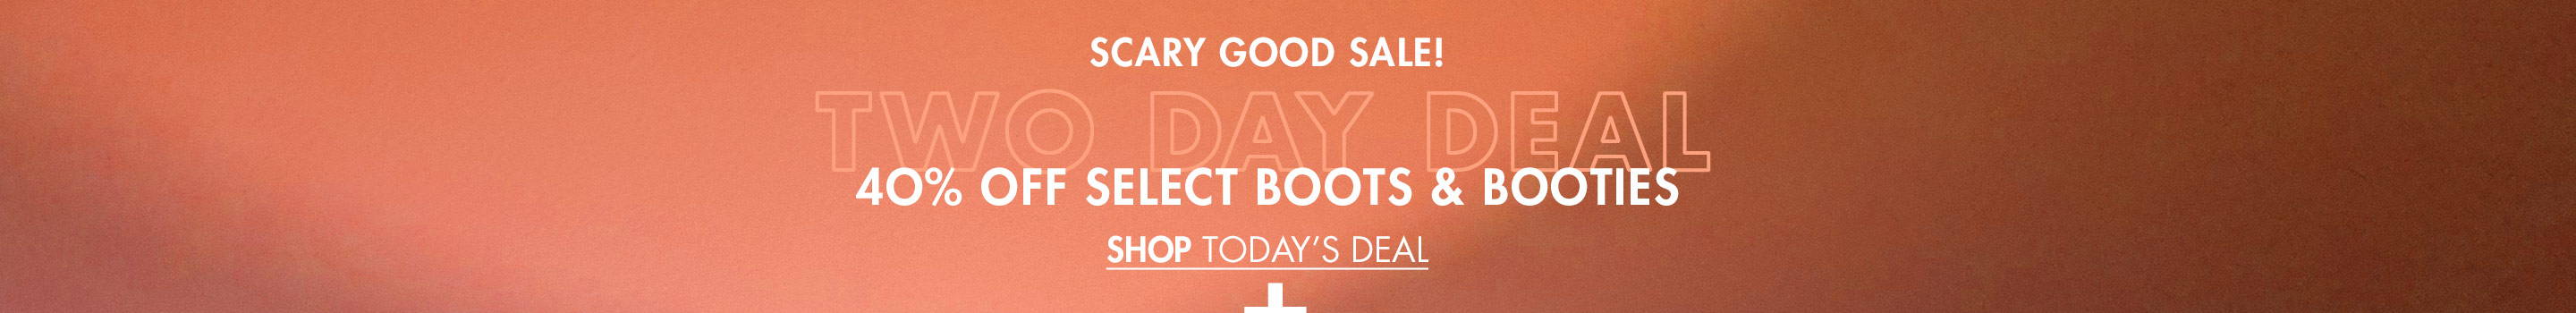 40% Off Boots & Booties